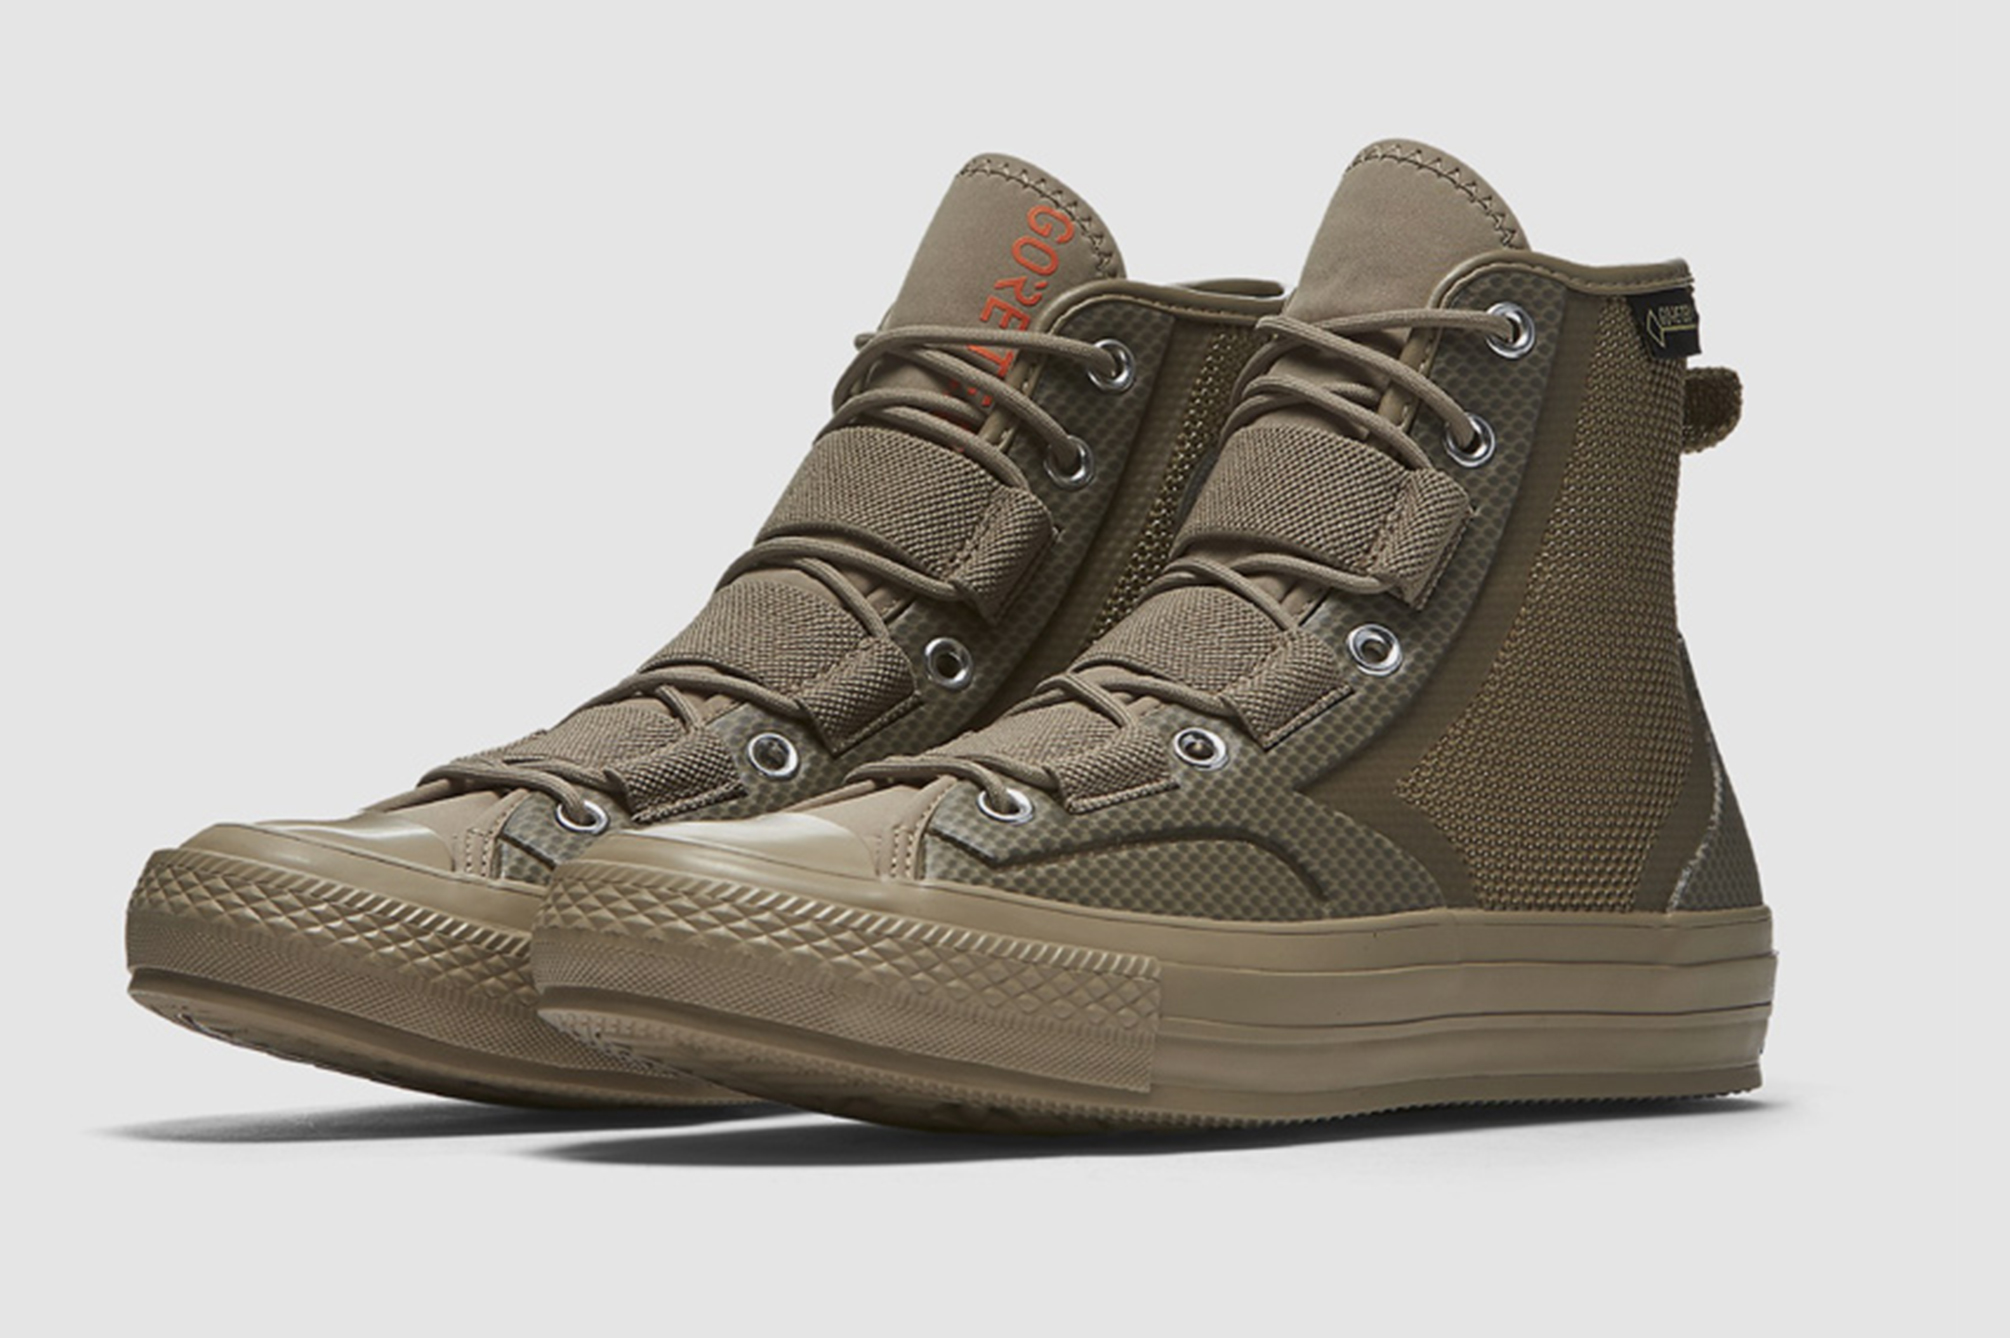 converse tactical boots for sale